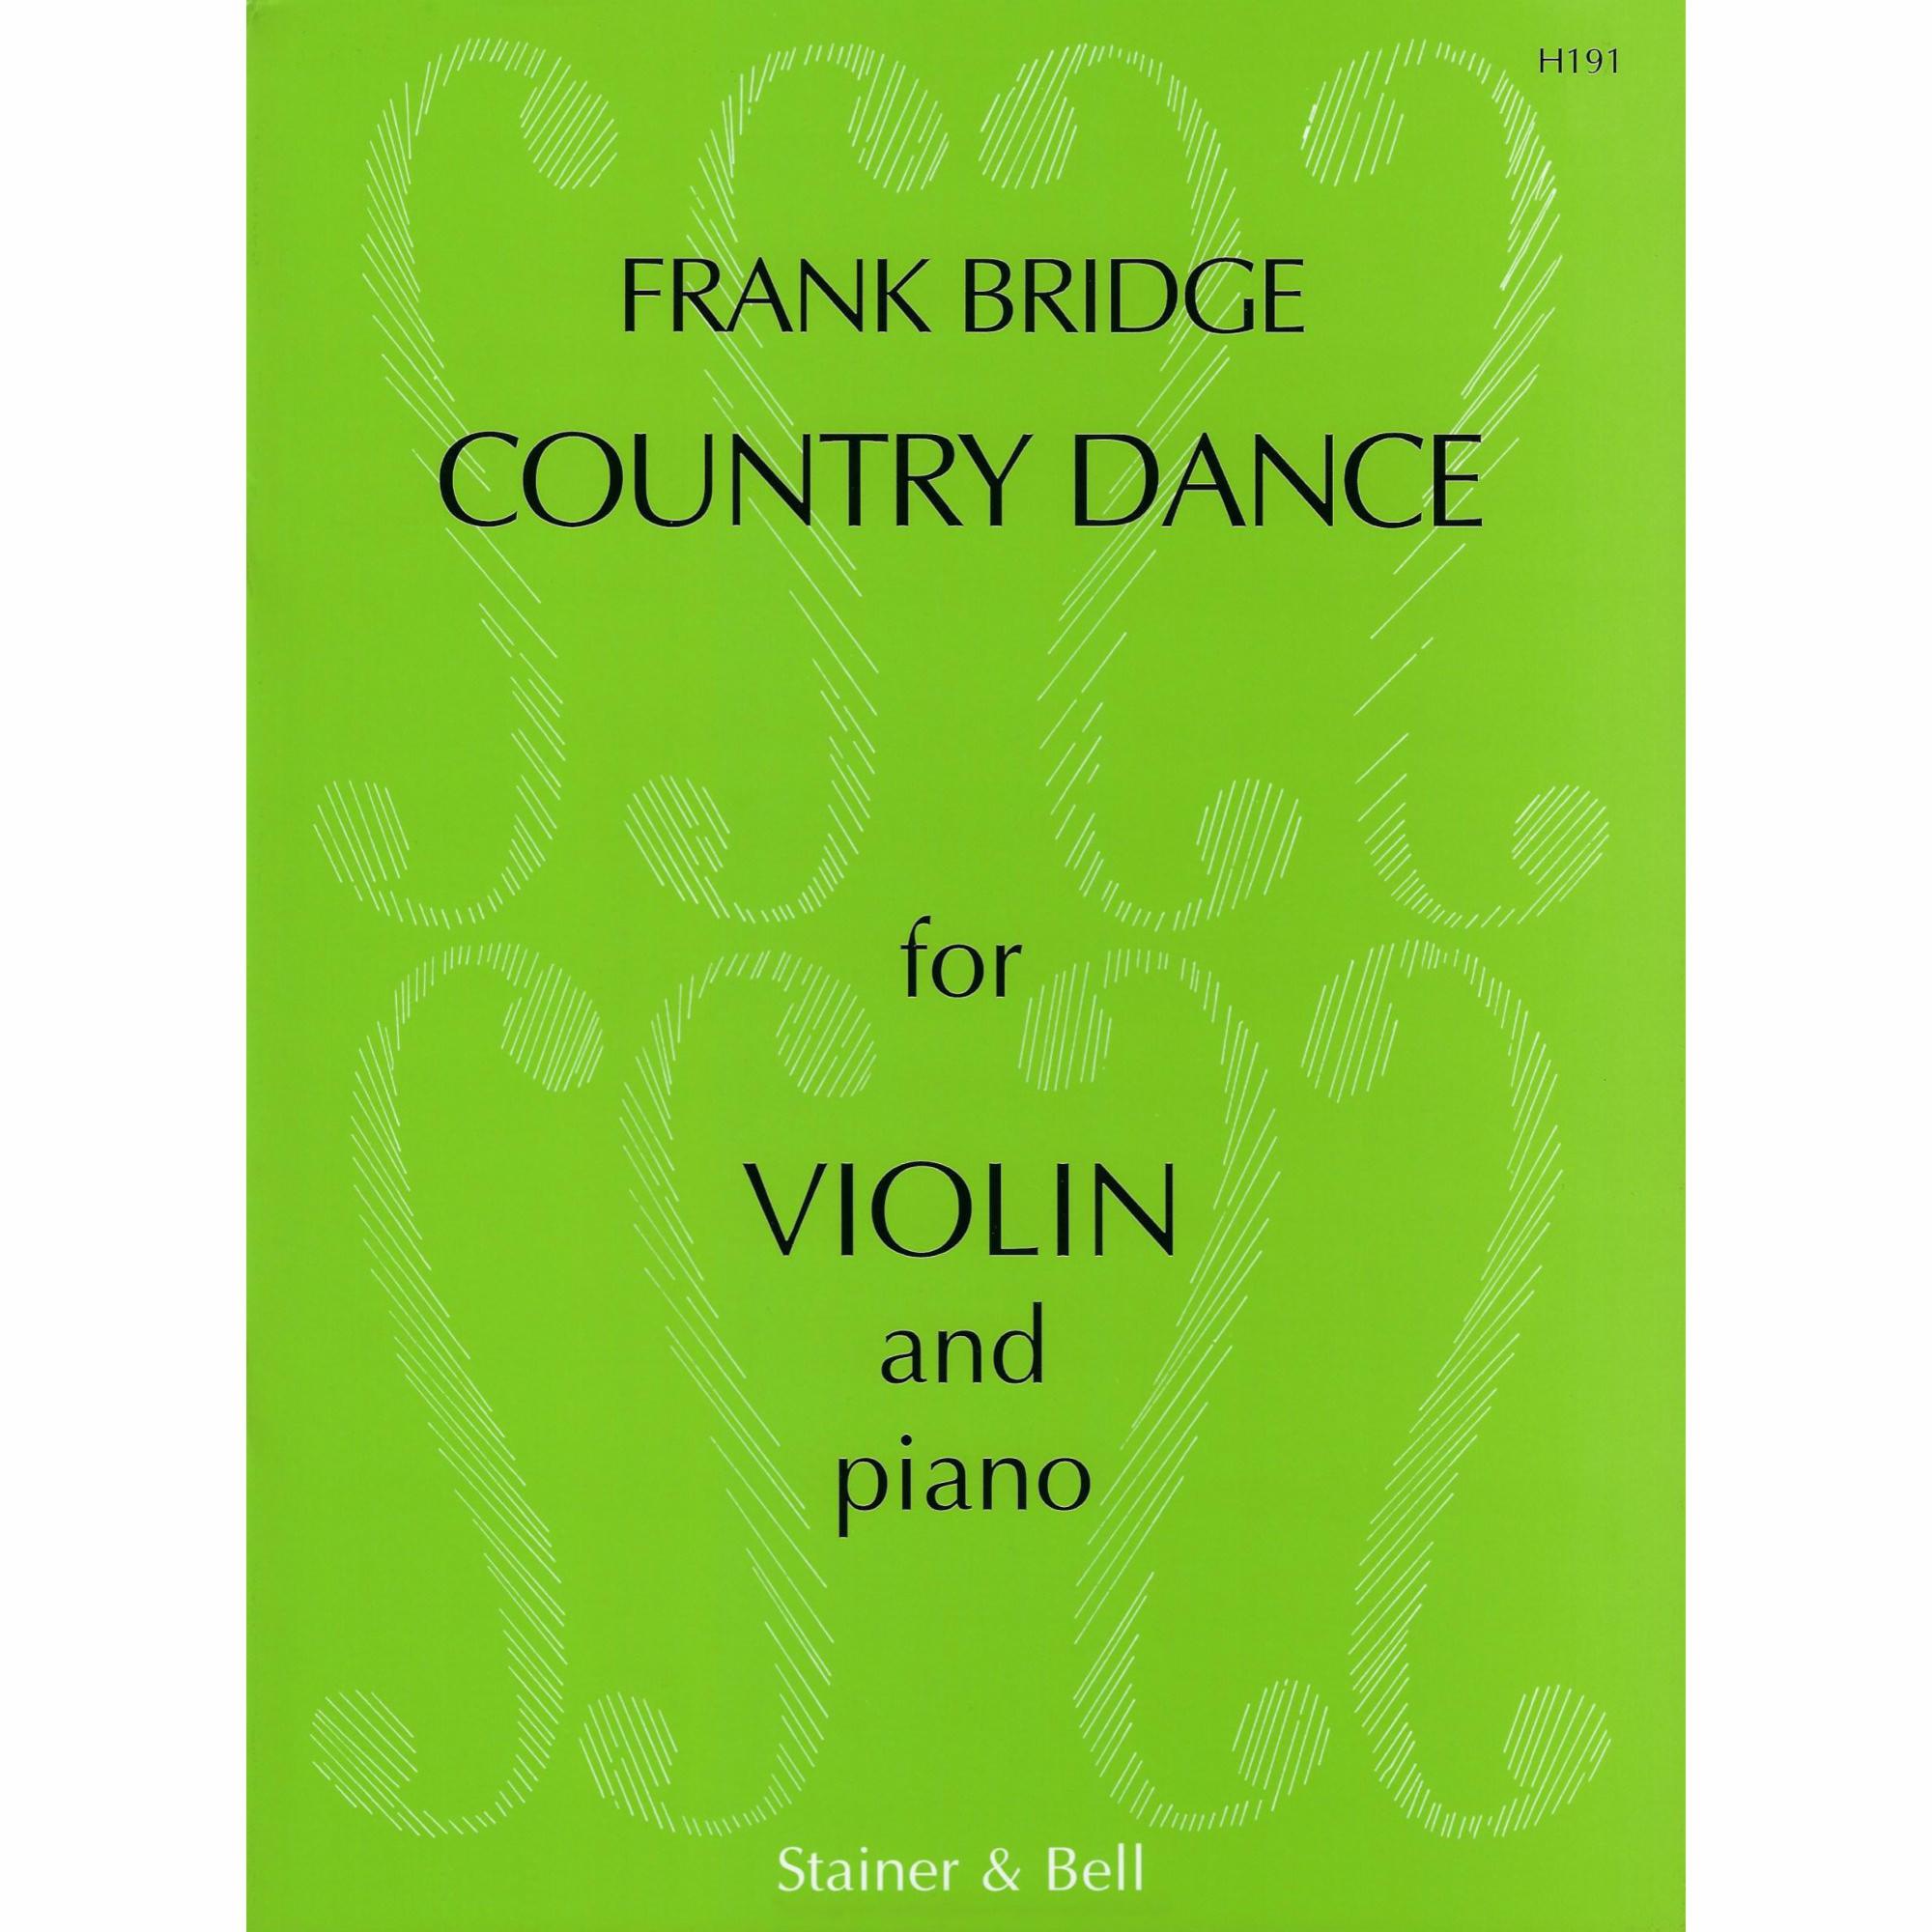 Bridge -- Country Dance for Violin and Piano